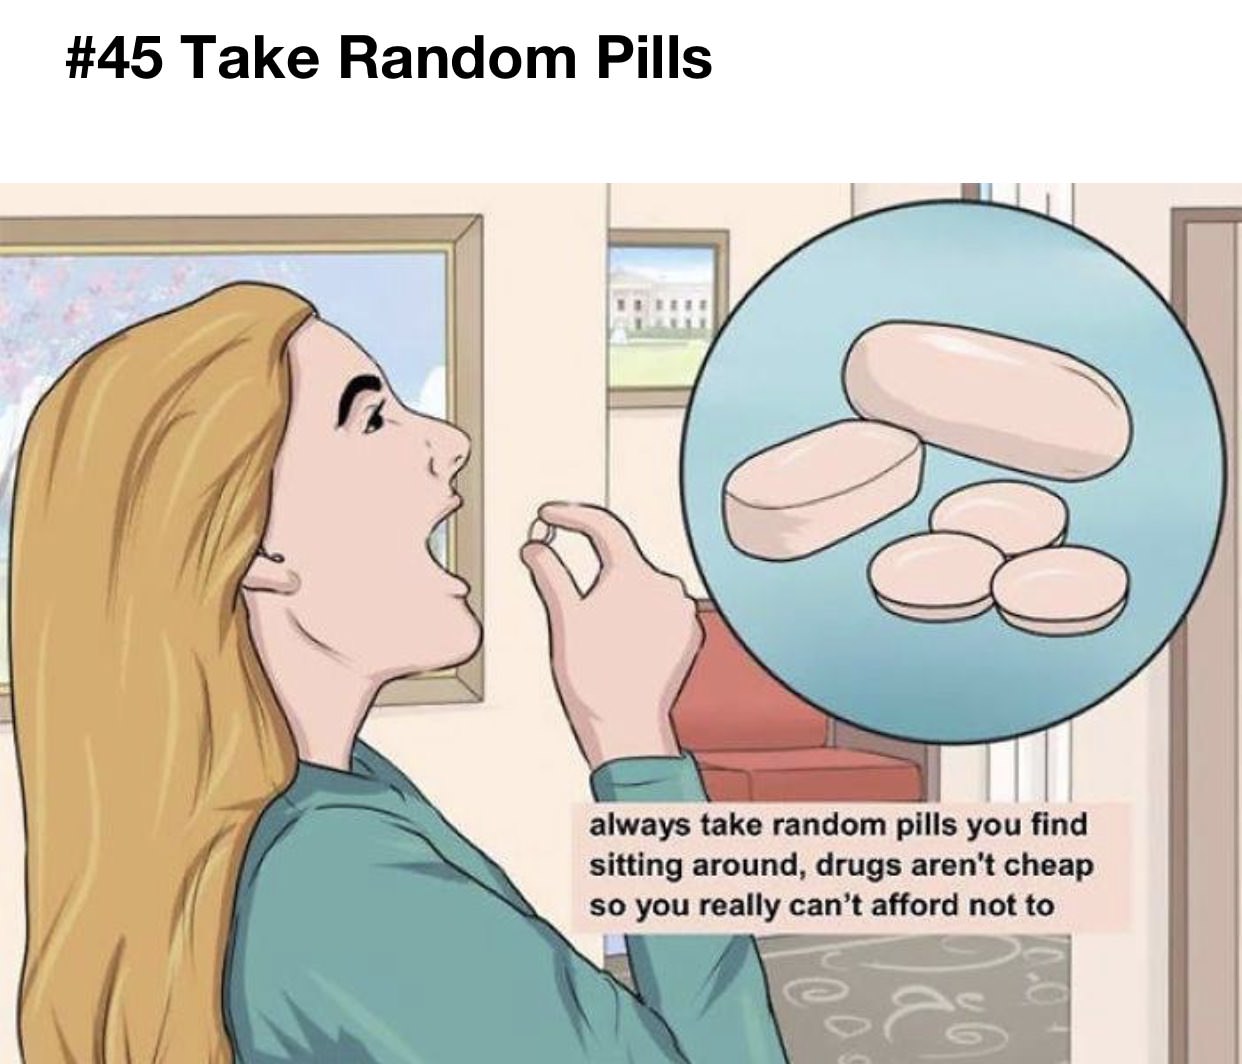 wikihow illustrations - Take Random Pills always take random pills you find sitting around, drugs aren't cheap so you really can't afford not to